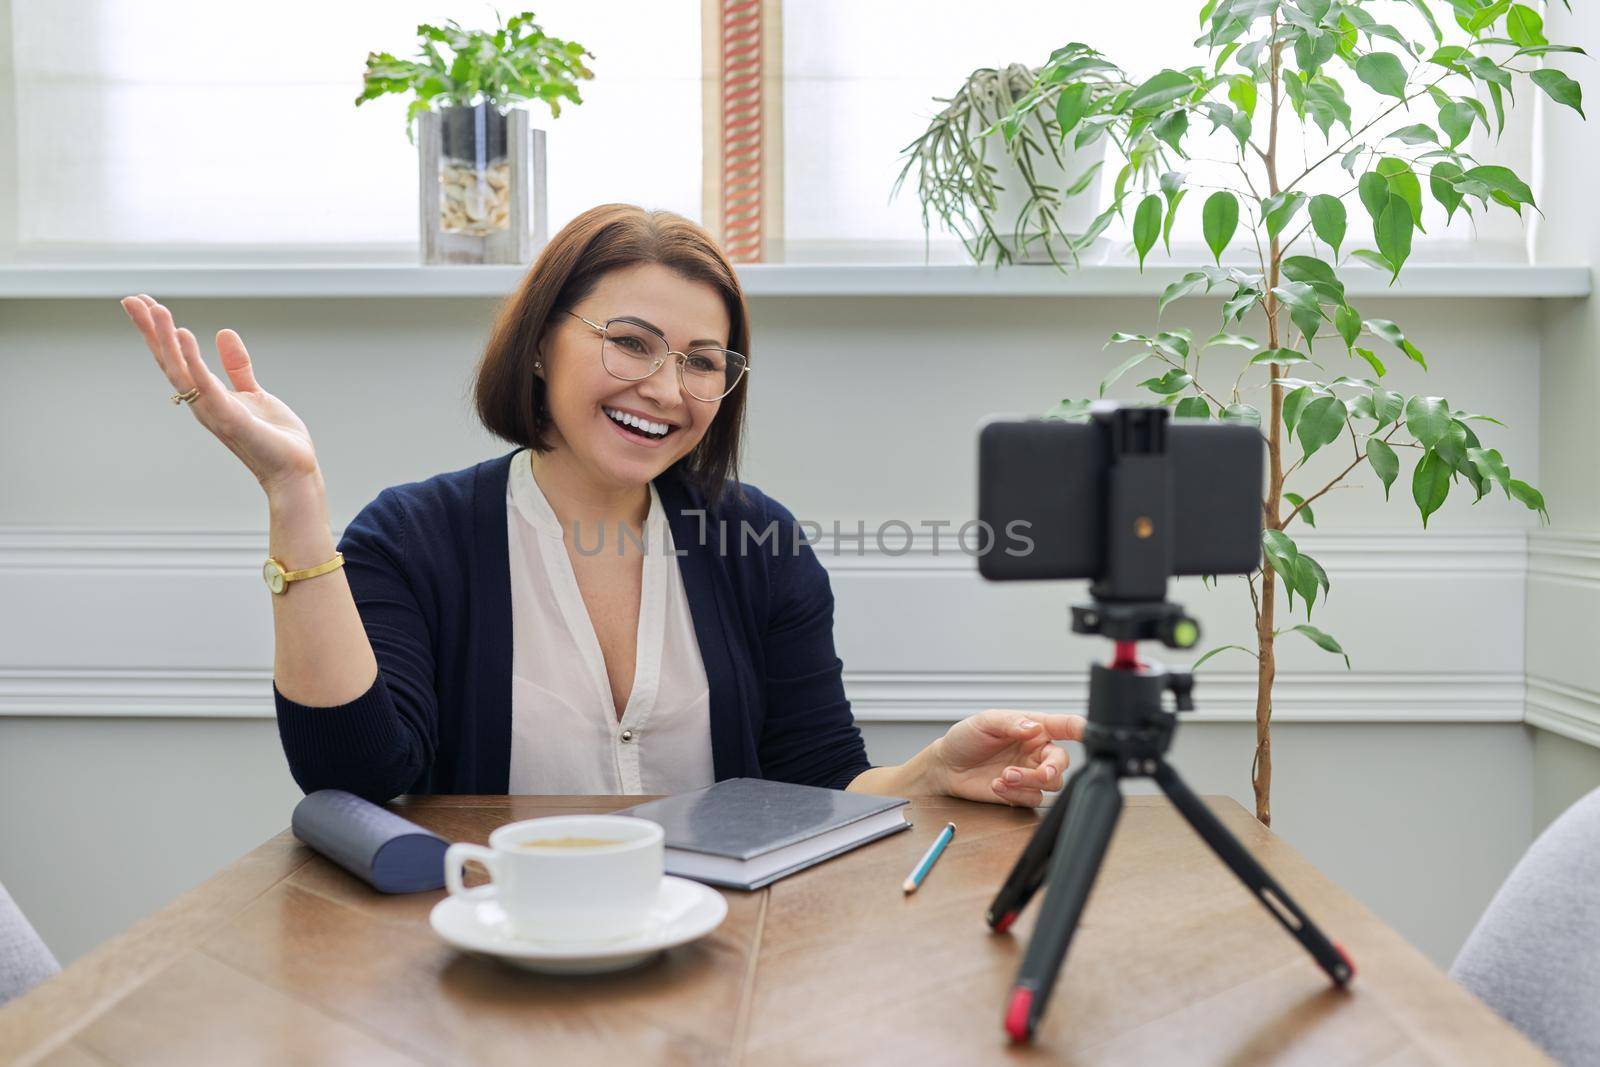 Woman teacher, business, psychologist, blogger, lawyer talking online using smartphone. Female looking at phone webcam on tripod, background table with cup of coffee notepad, window